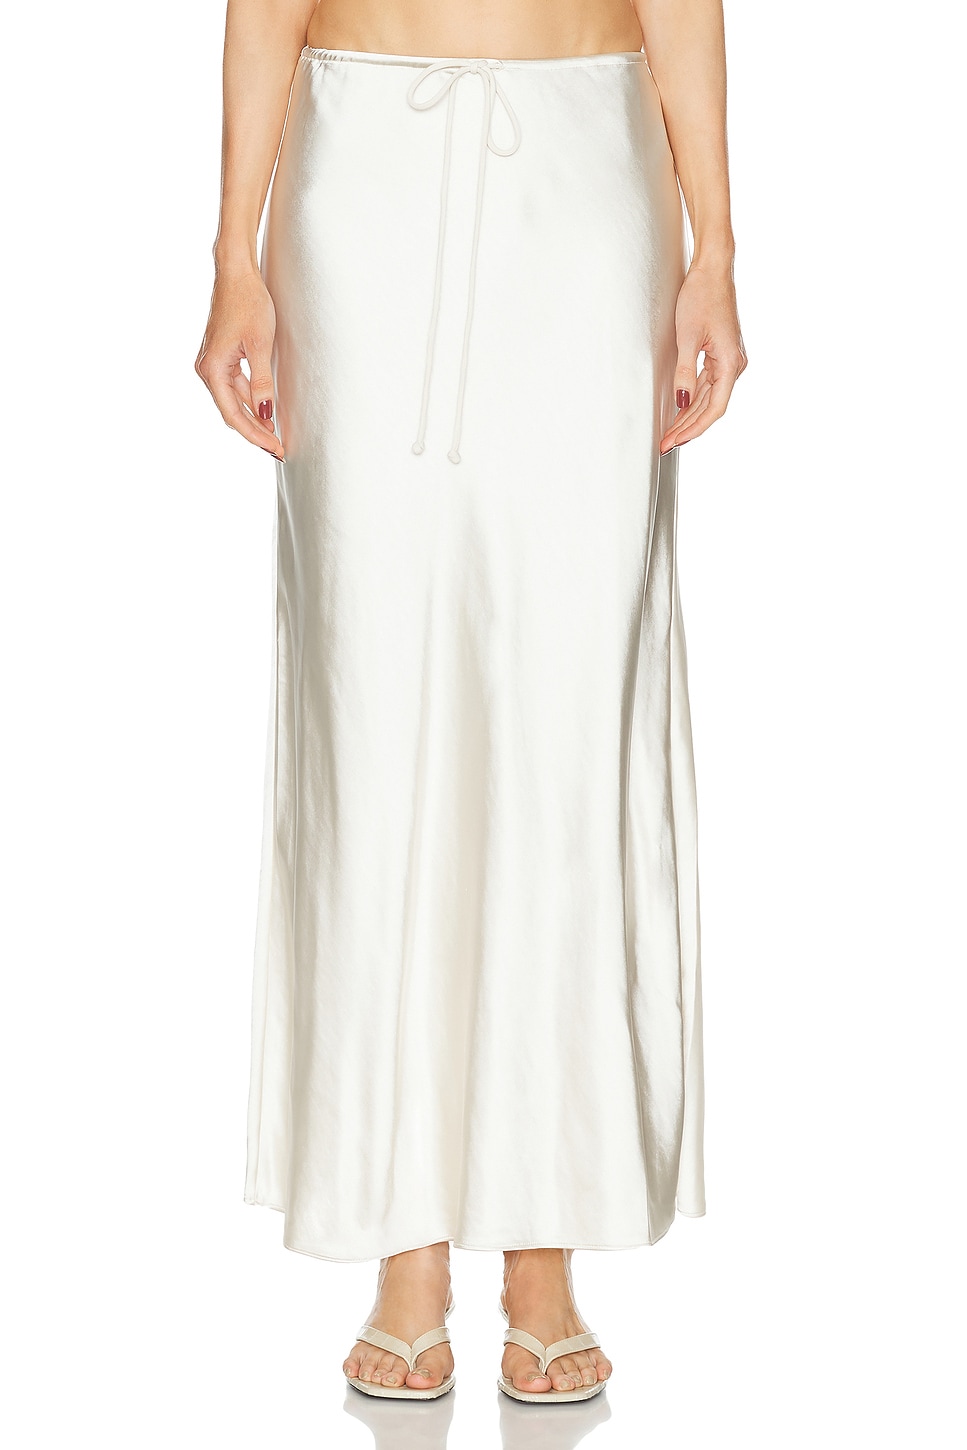 by Marianna Etienne Midi Skirt in Ivory